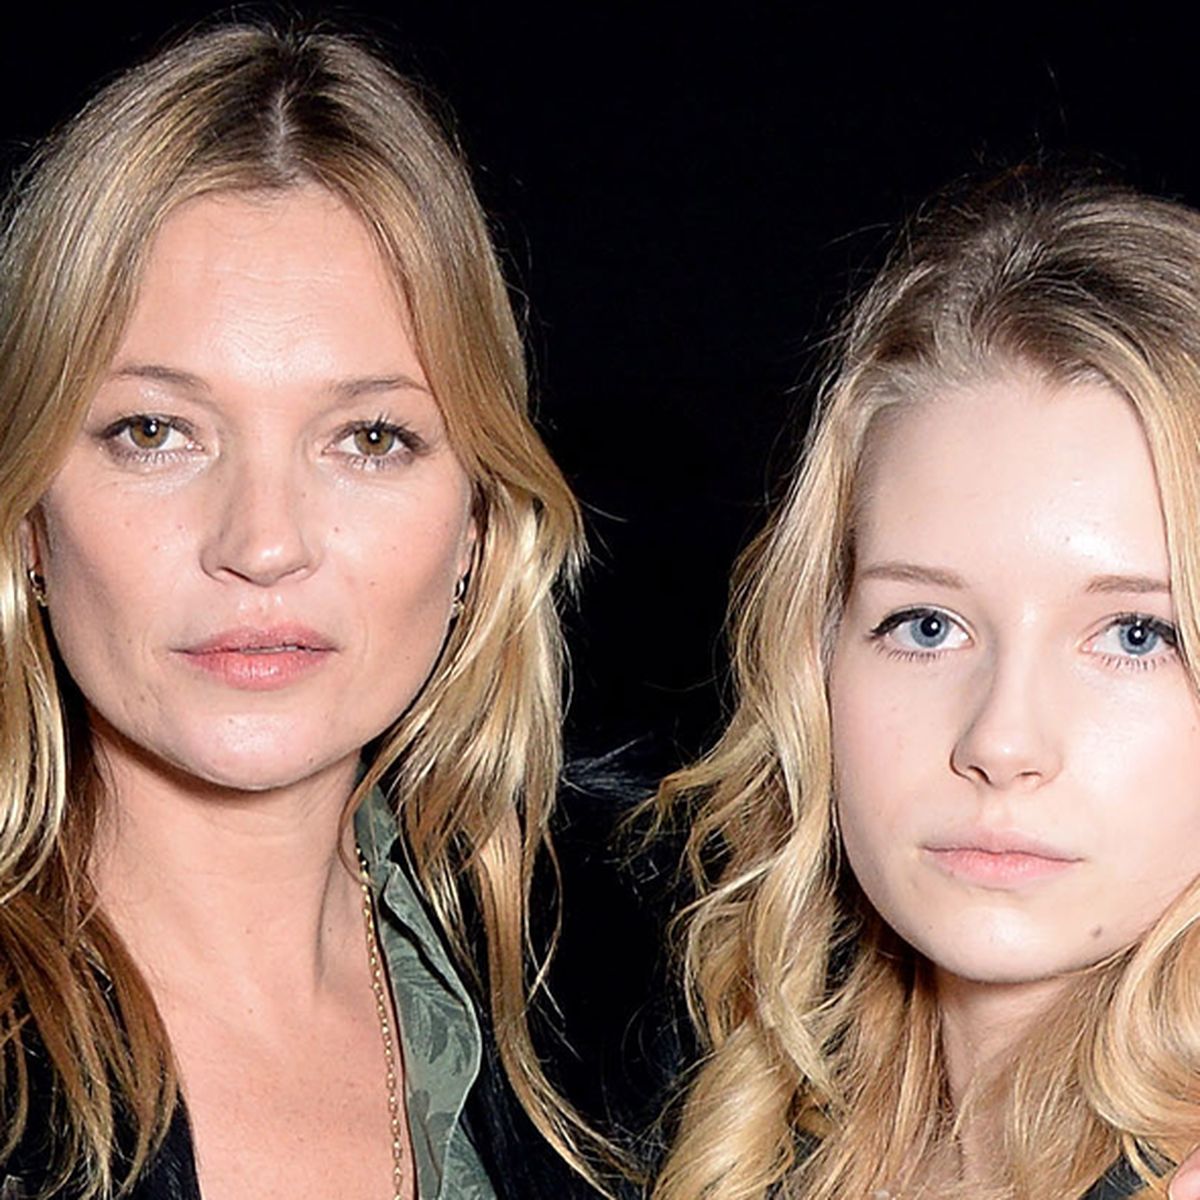 Lottie Moss says she has 'never been close' to supermodel sister